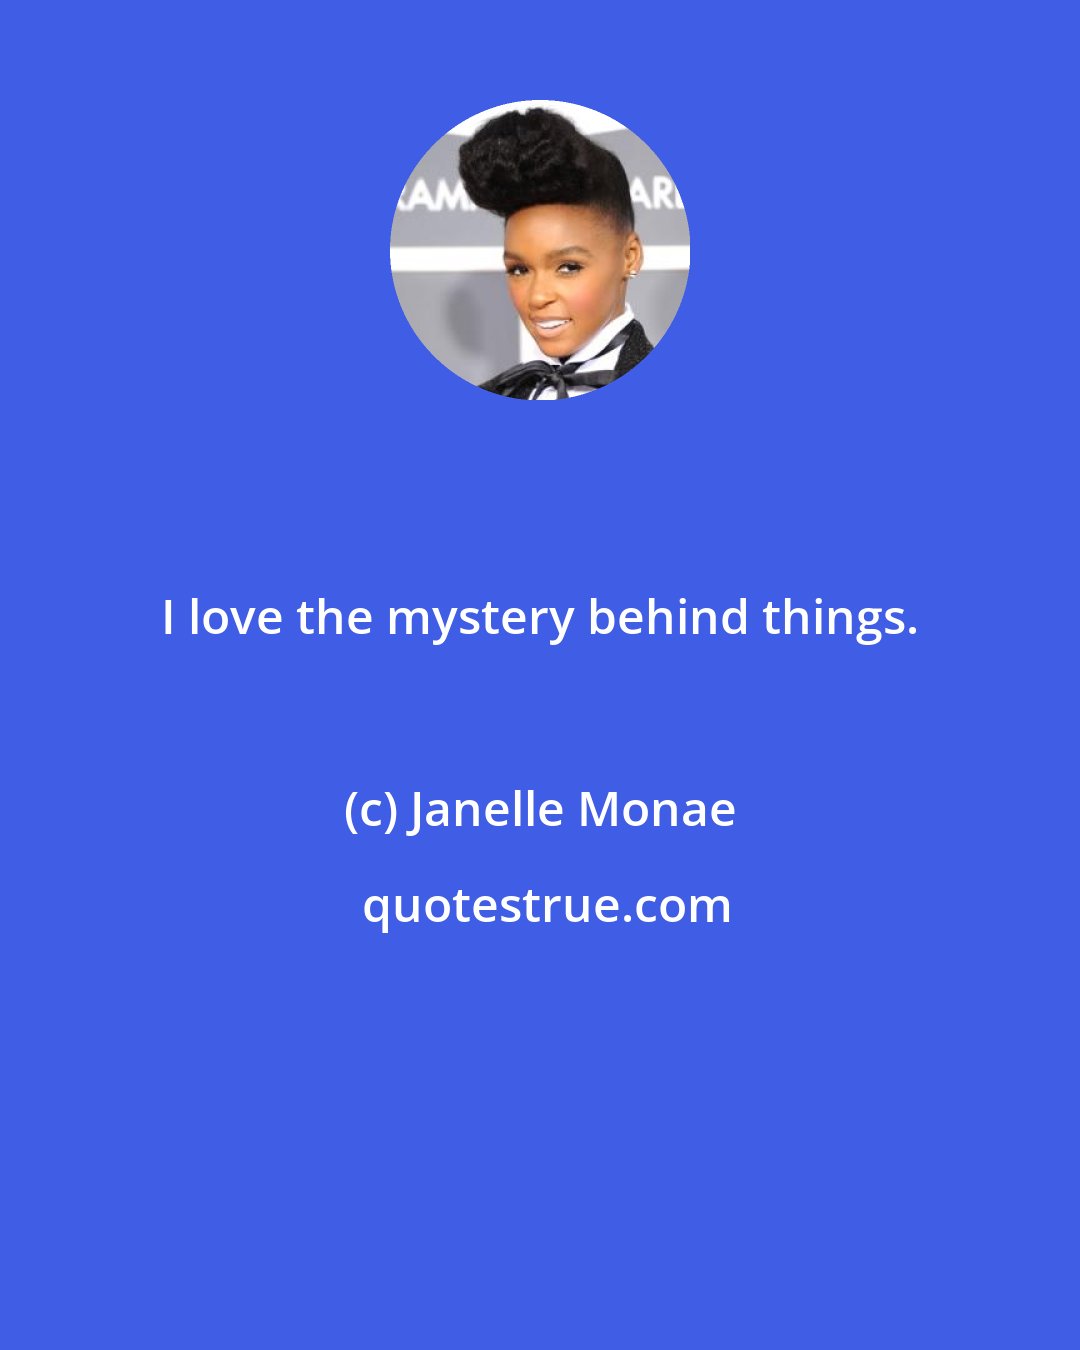 Janelle Monae: I love the mystery behind things.